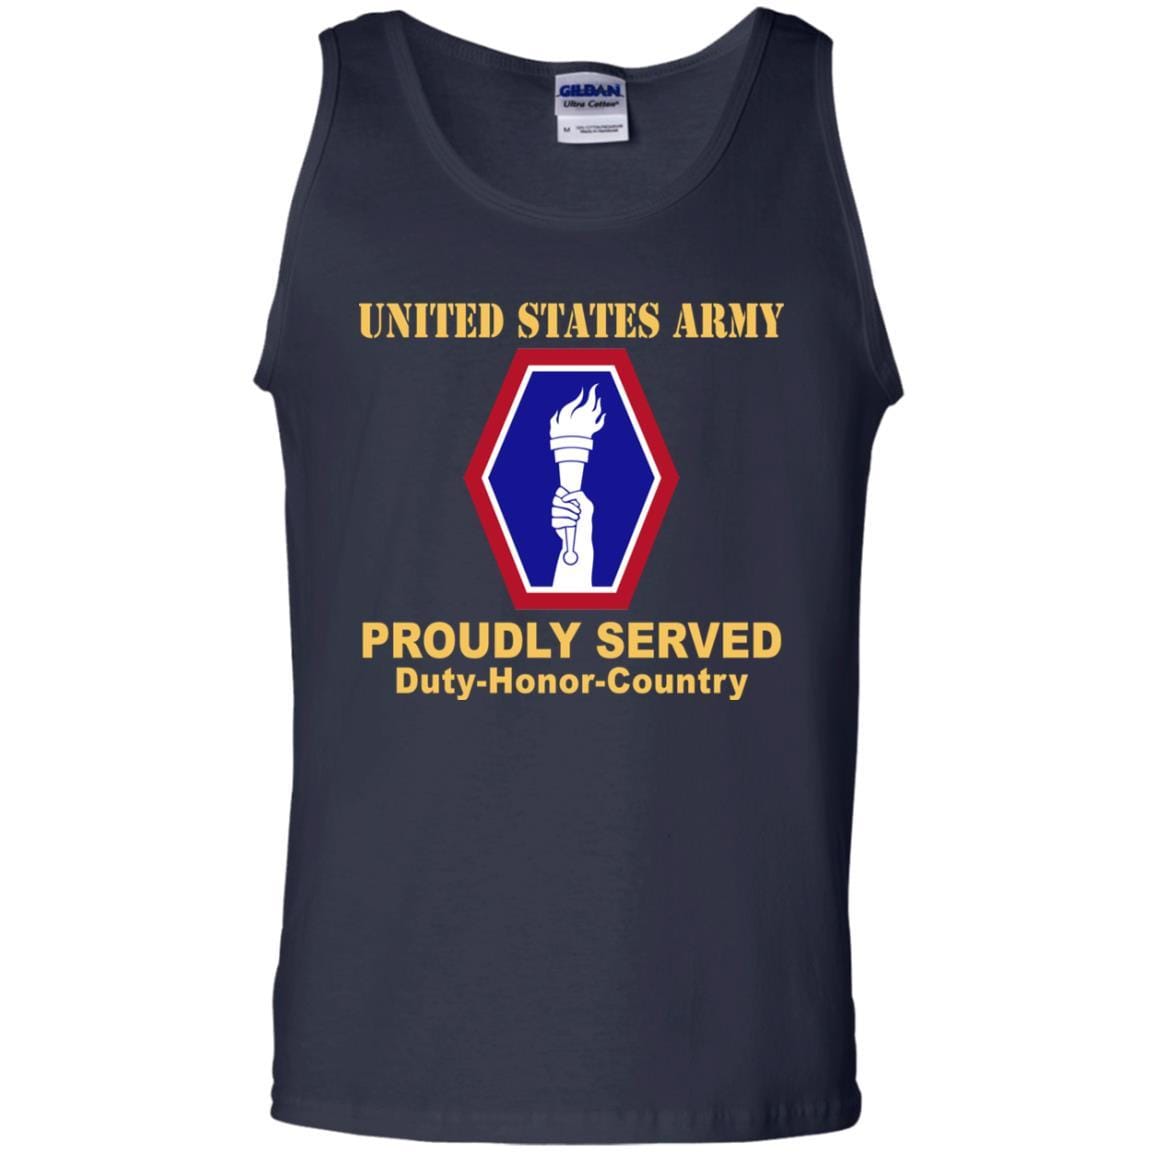 US ARMY 442 INFANTRY REGIMENT- Proudly Served T-Shirt On Front For Men-TShirt-Army-Veterans Nation